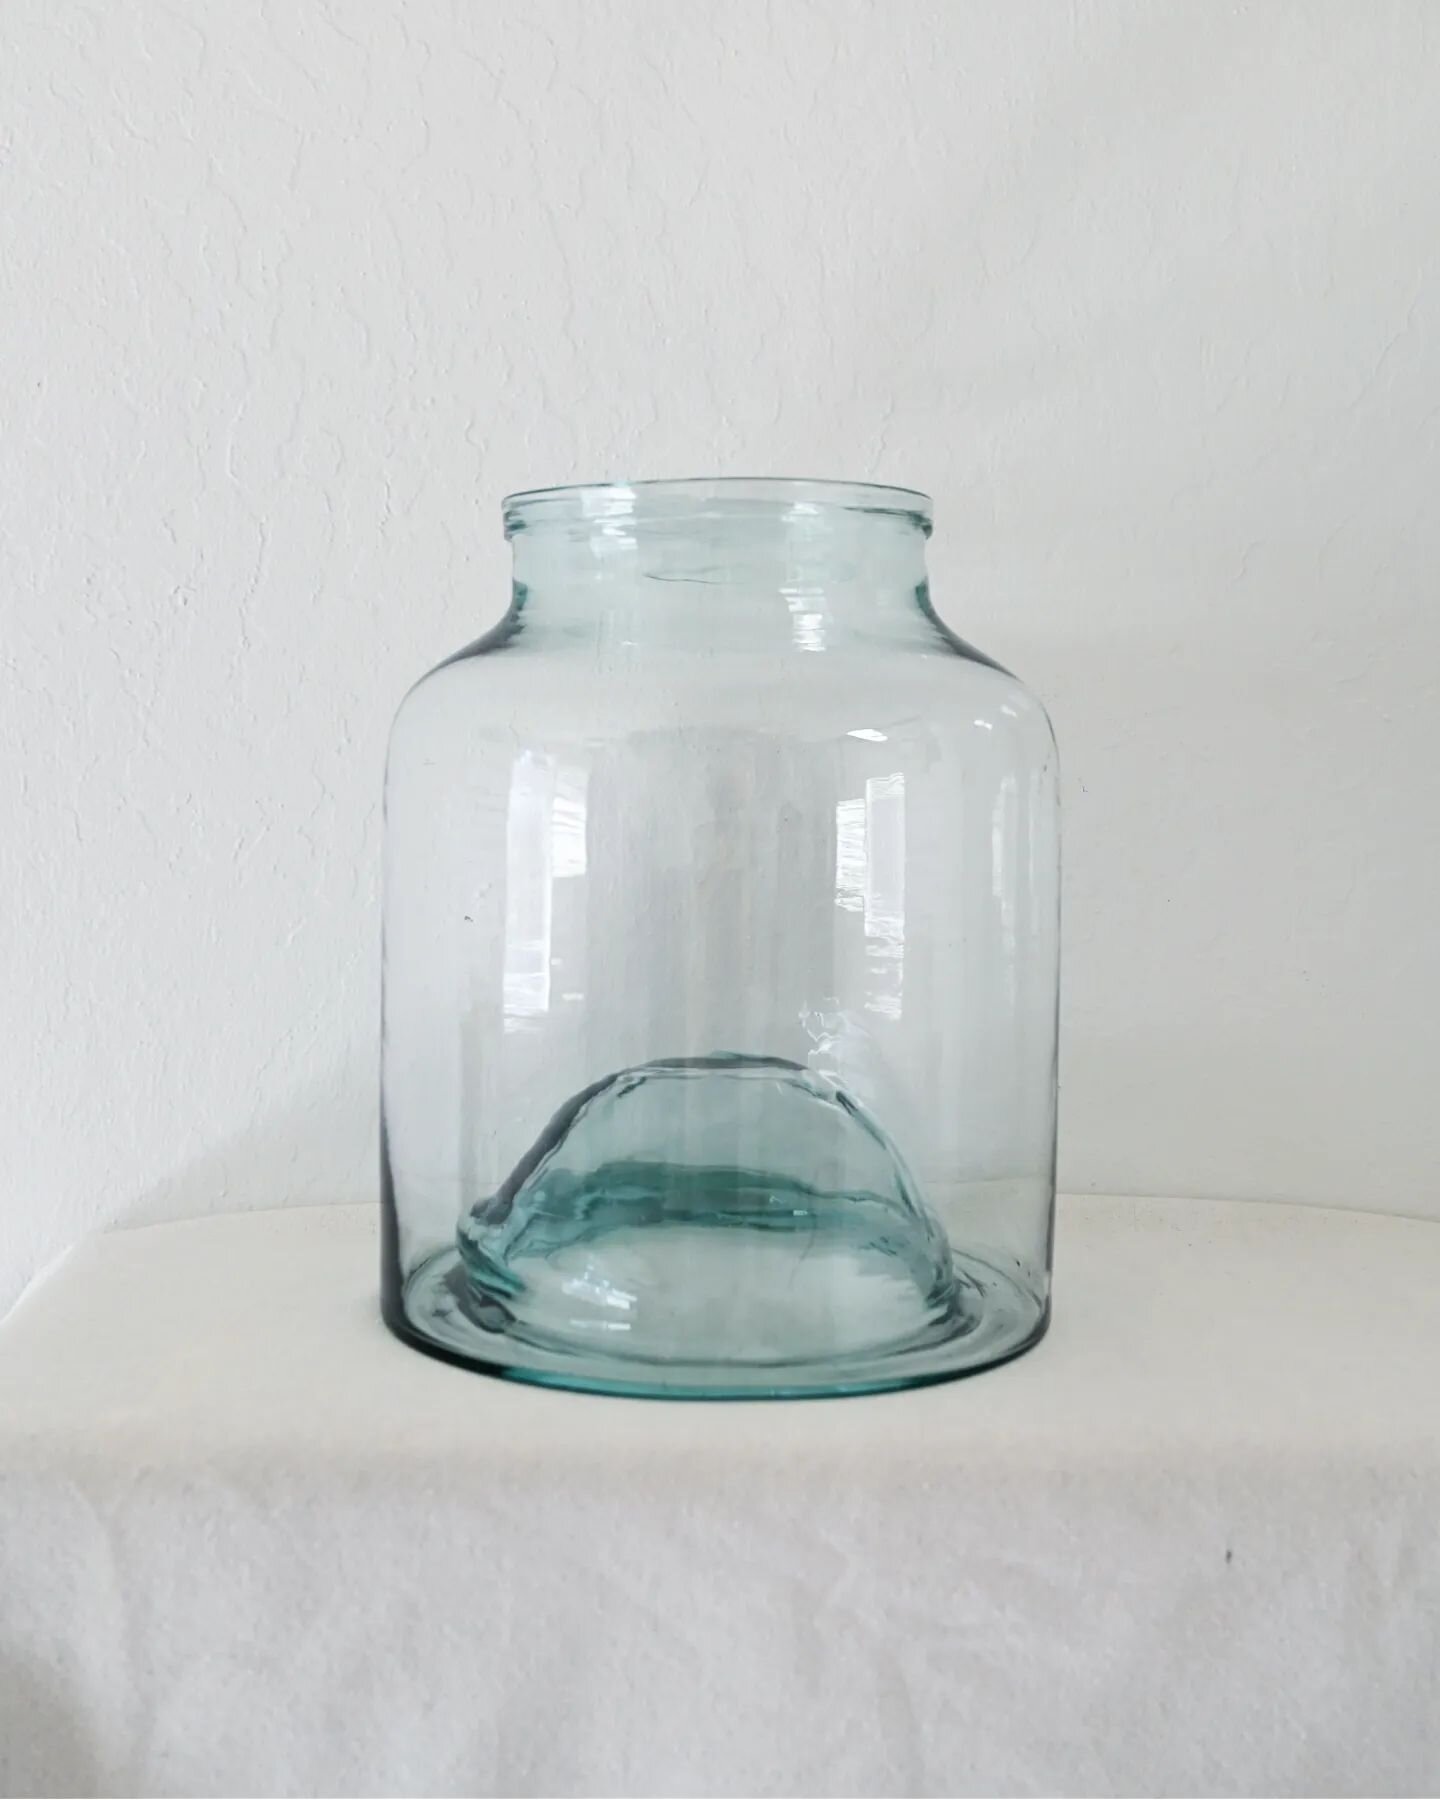 This pickling jar is beautiful &amp; in excellent vintage condition with a lovely large bubble blown into the base to add intrigue and excitement in your decor space. We love this for holding large branches or florals - a perfect transitional decor p